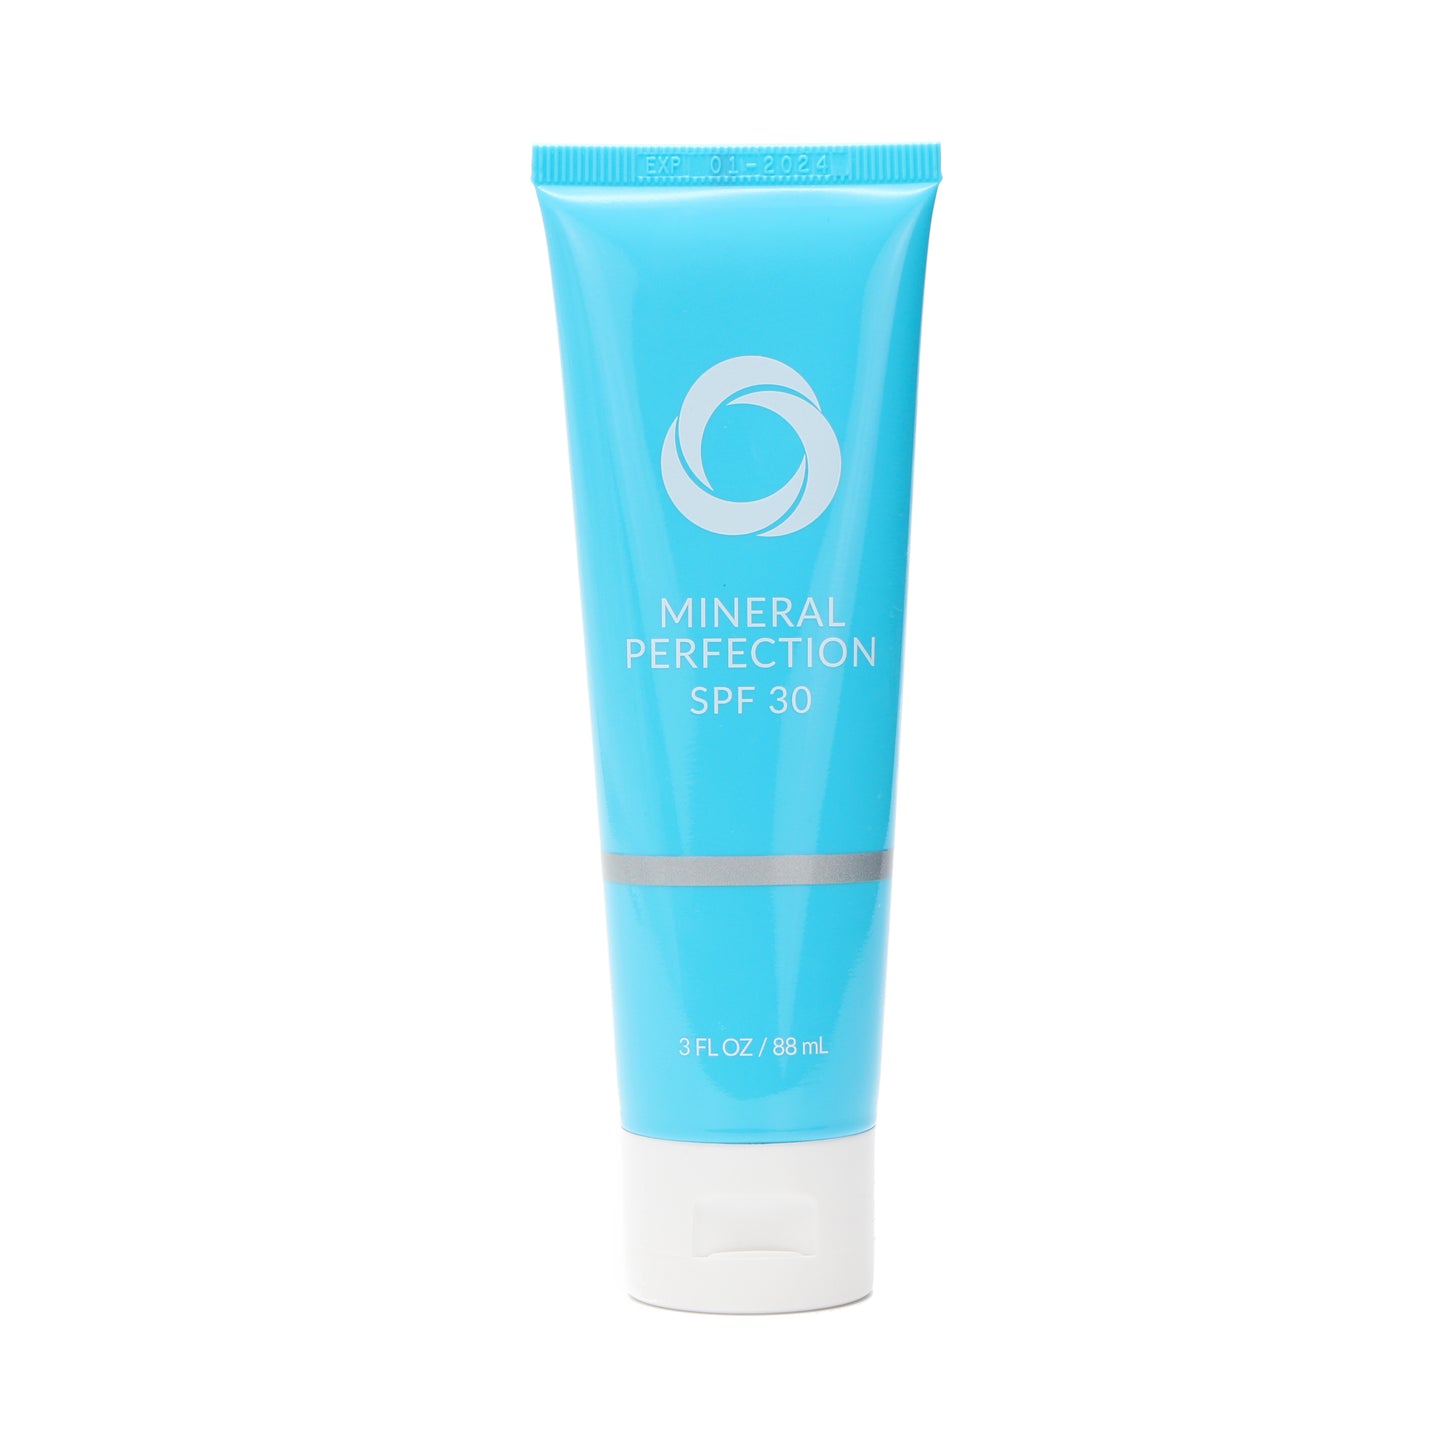 MINERAL PERFECTION SPF 30